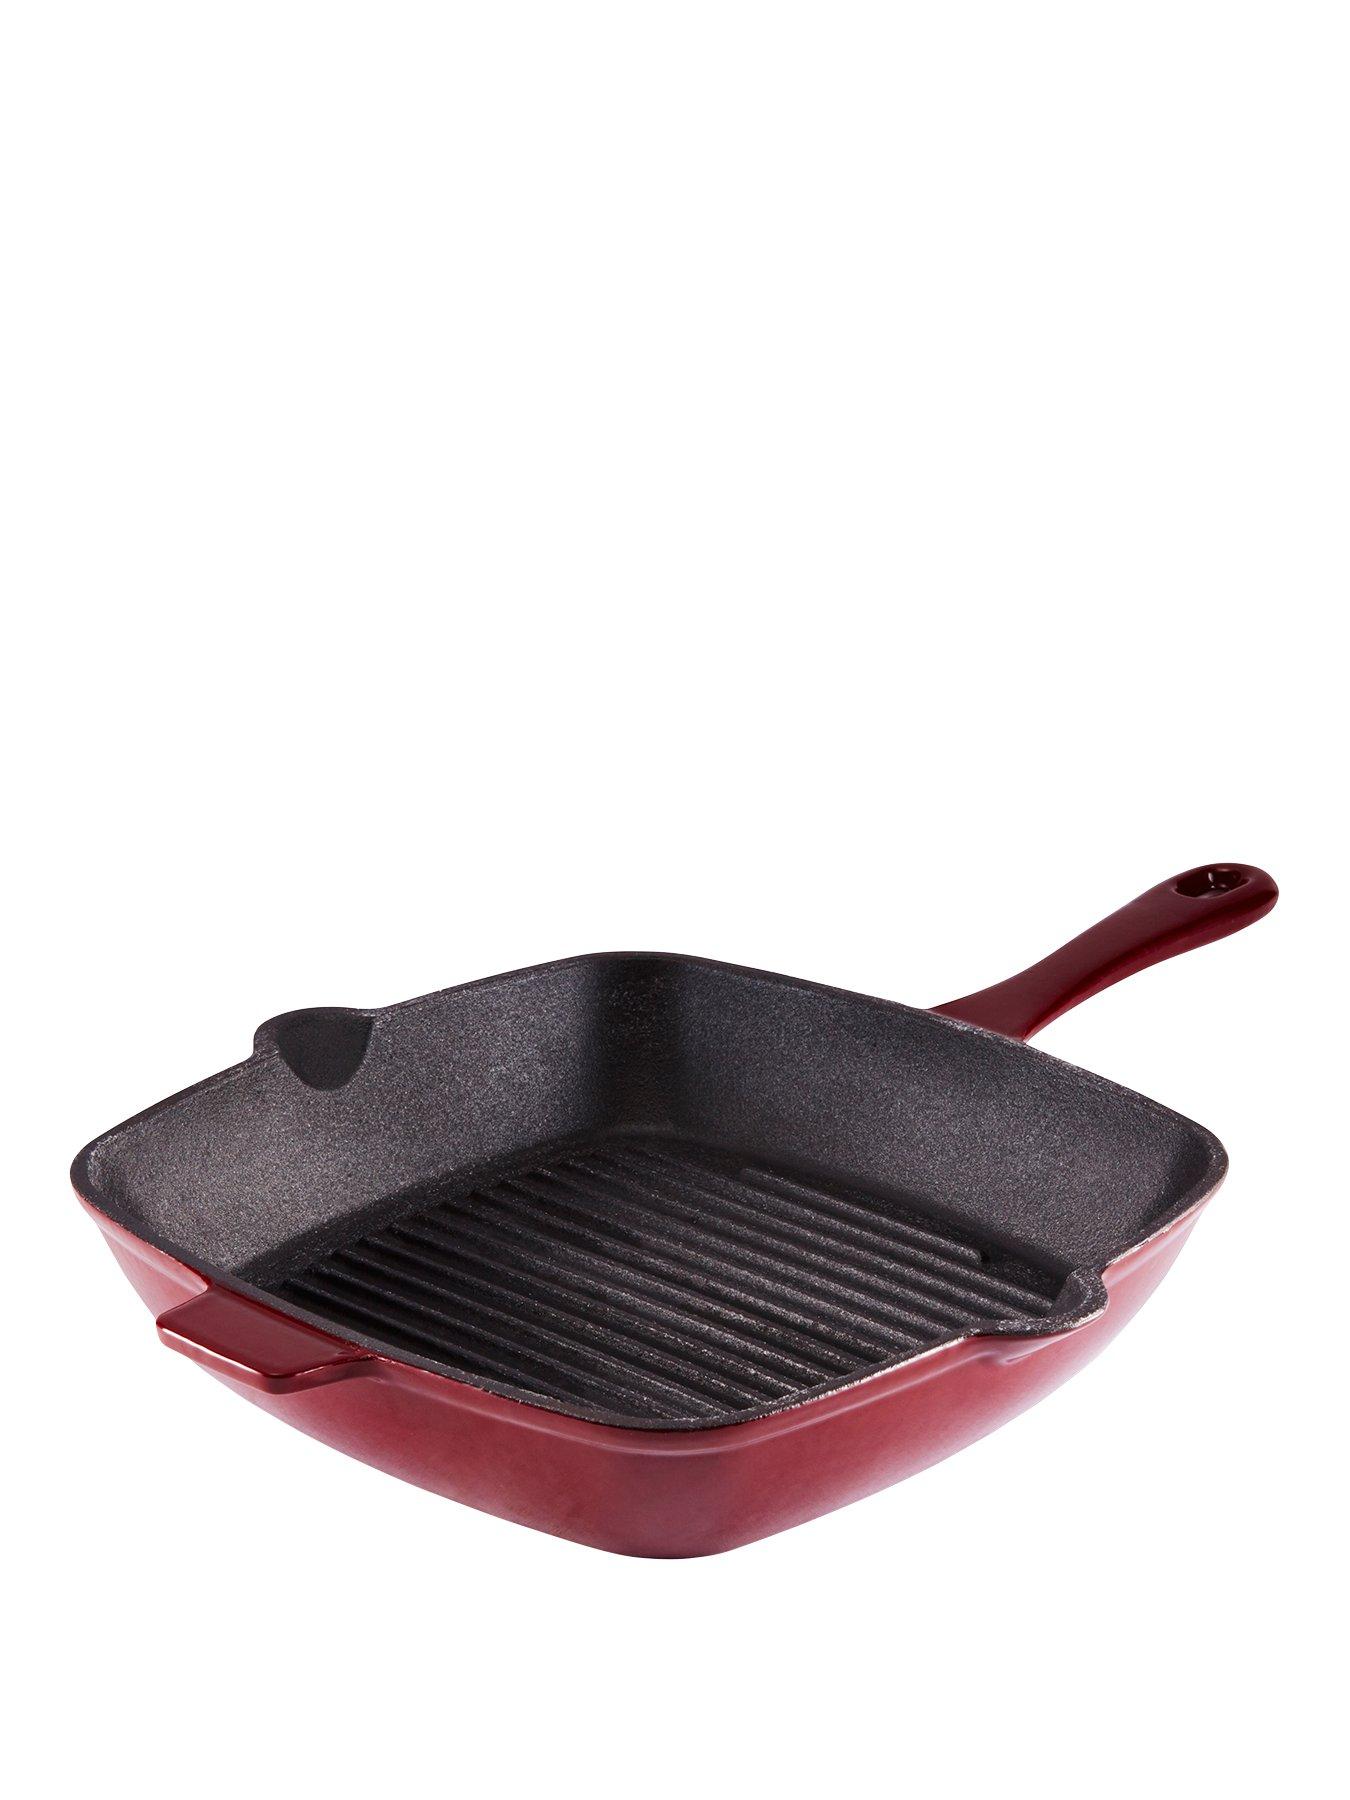 23cm Square KitchenCraft Cast Iron Griddle Pan for Induction Hob 